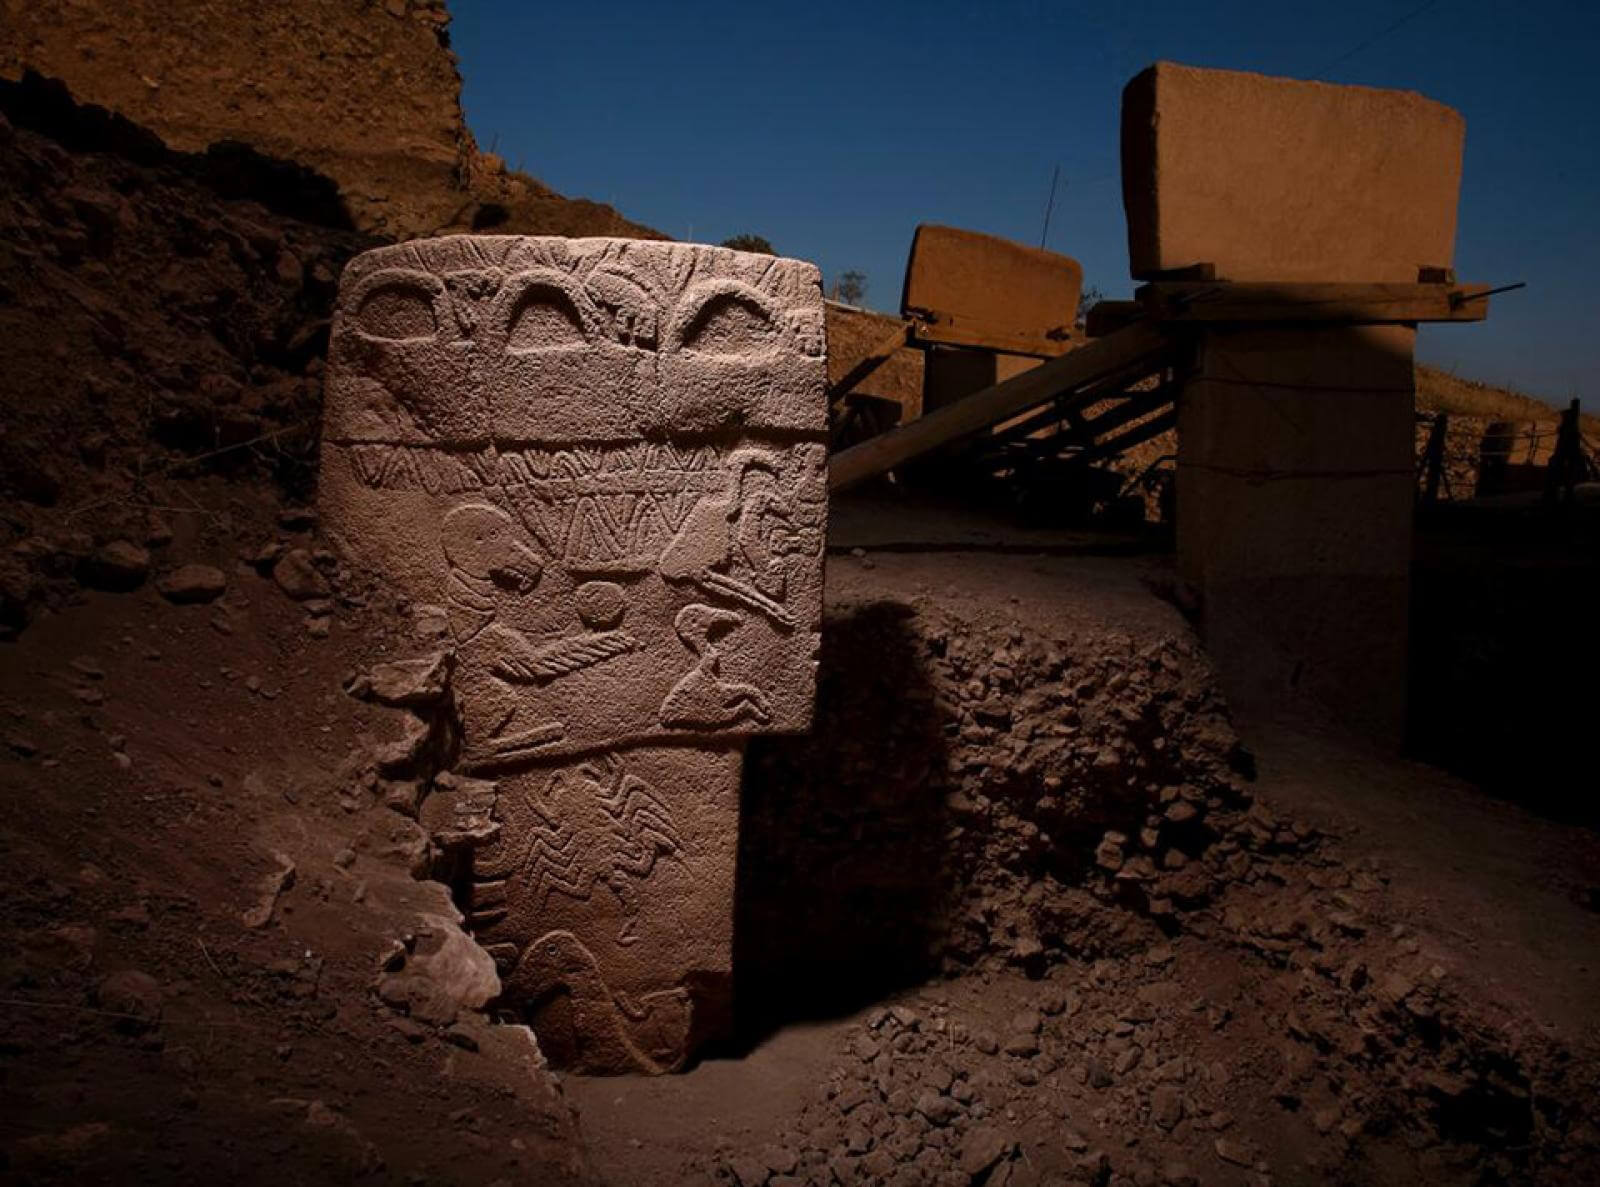 Is Göbekli Tepe the Oldest Temple in the World?